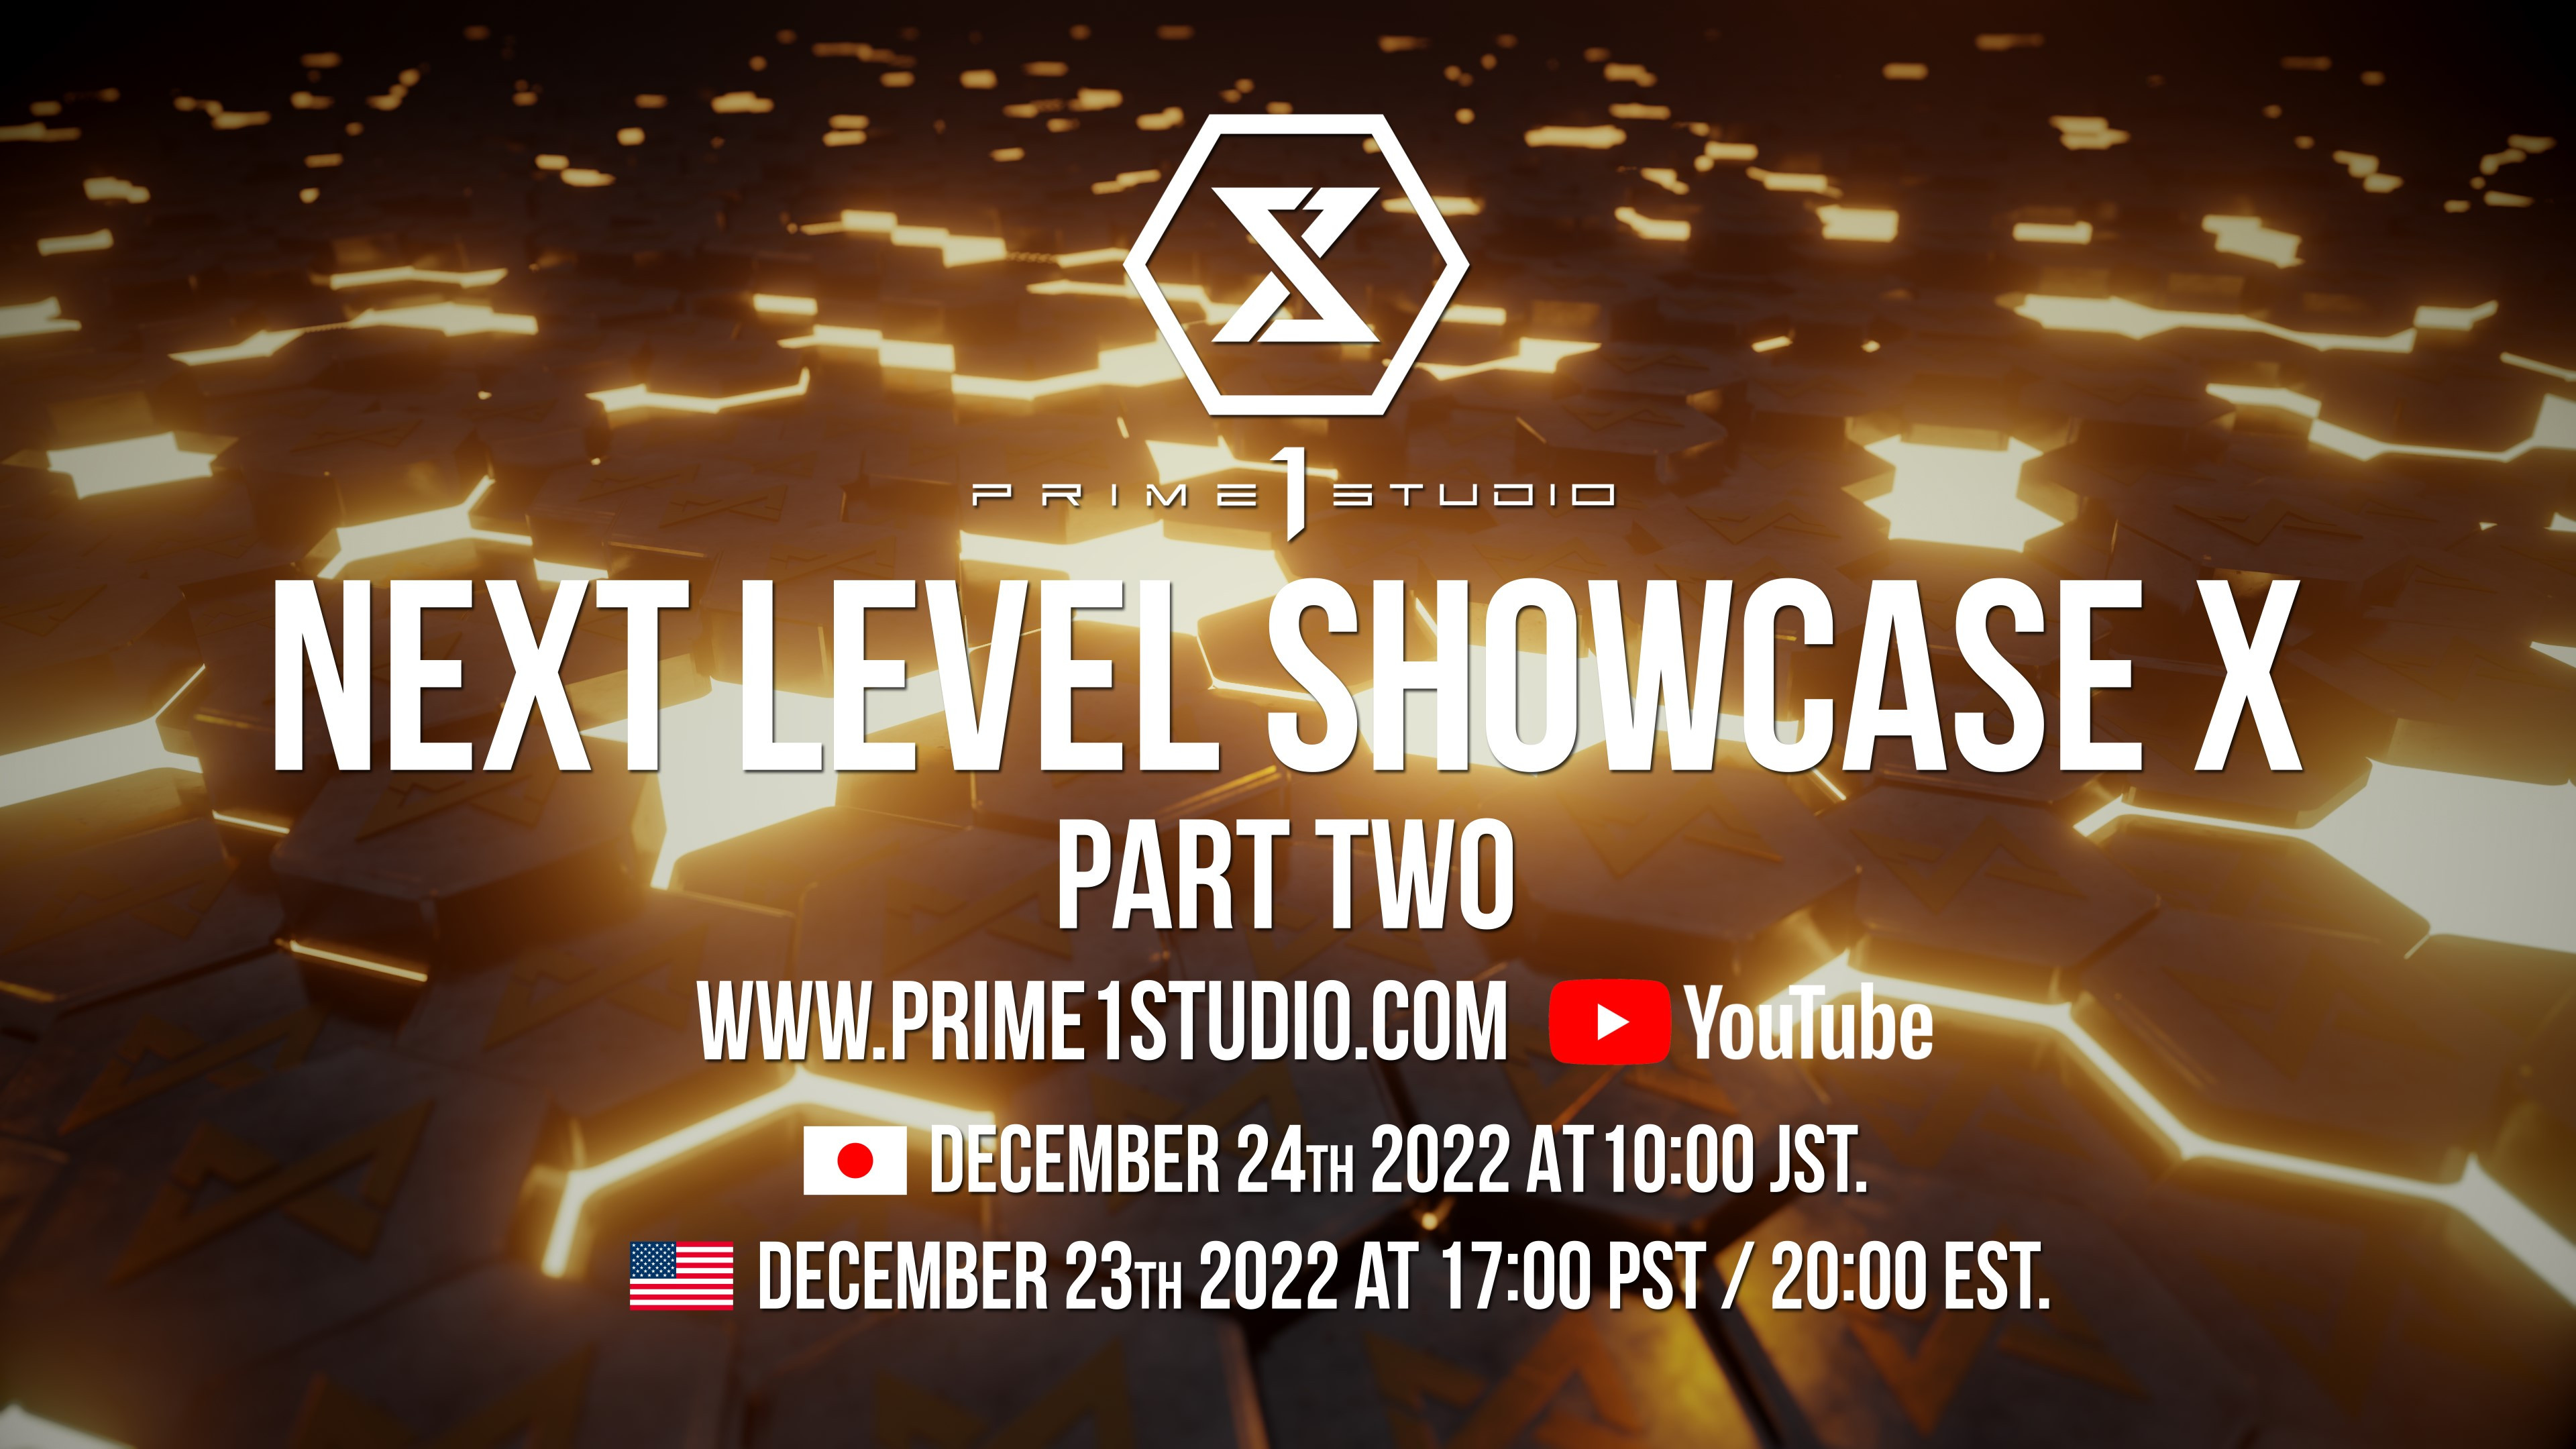 Join our Next Level Showcase XPart Two on YouTube on December 24th